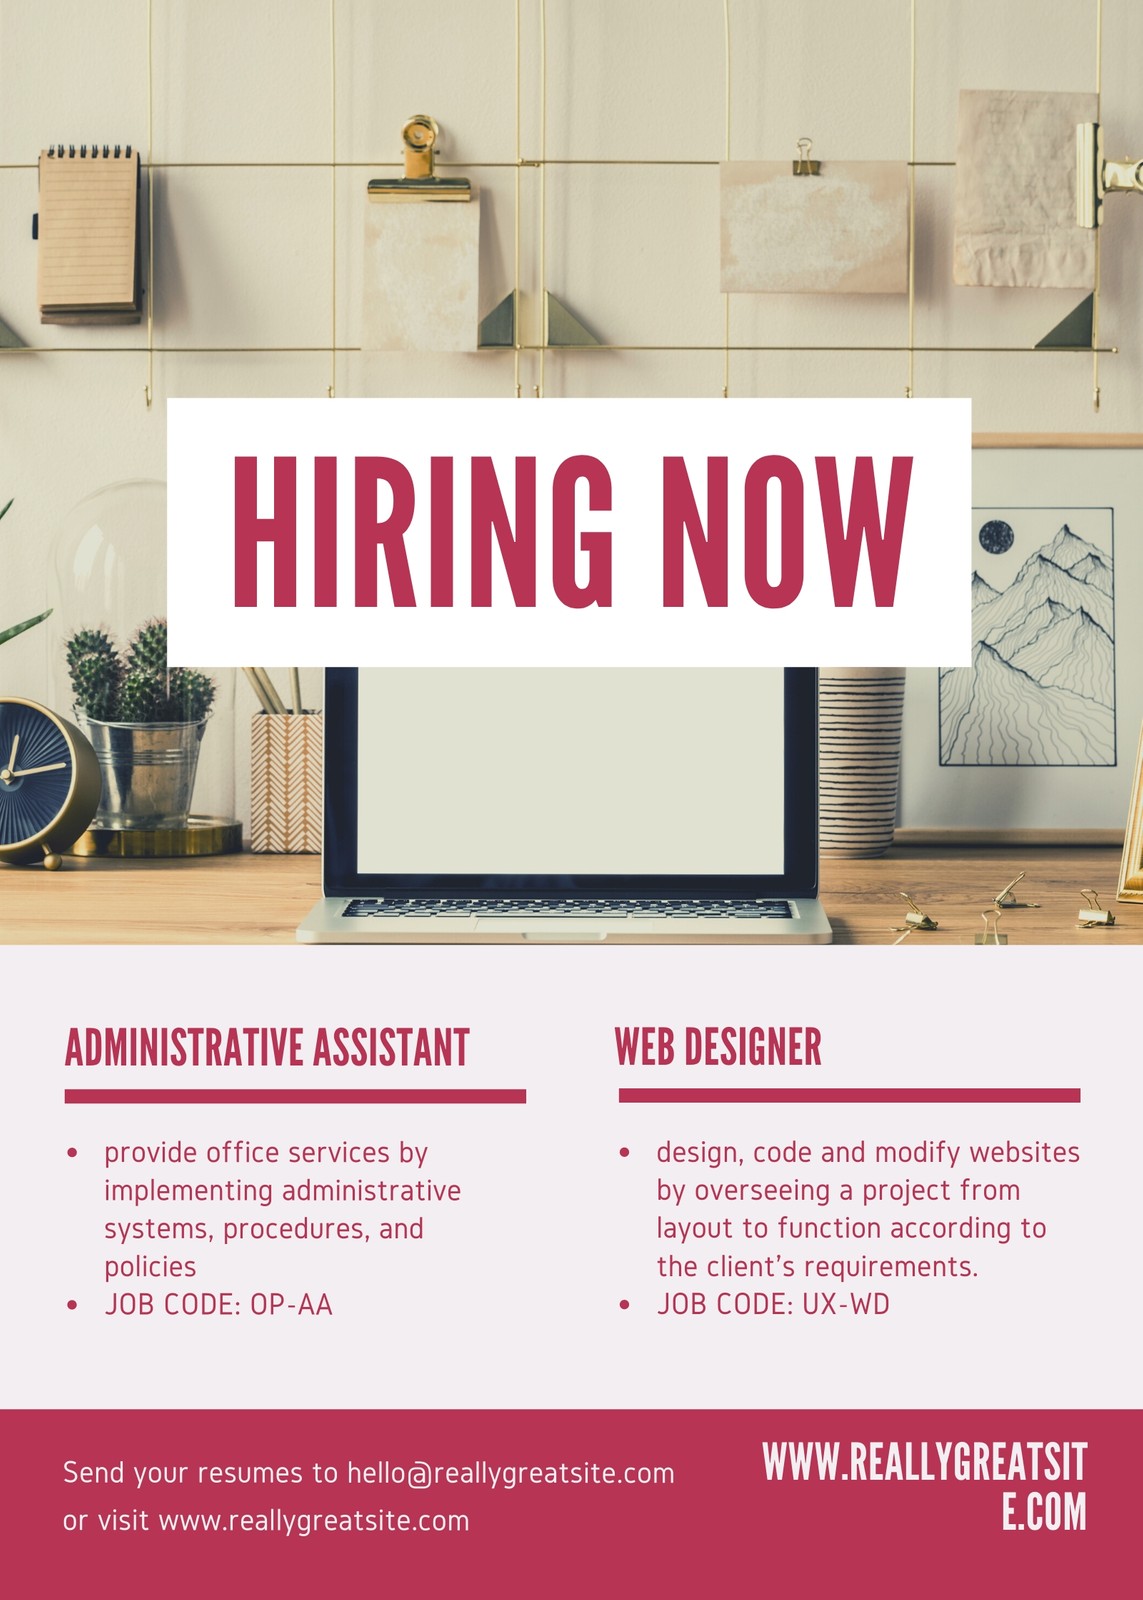 Free and customizable job announcement templates | Canva